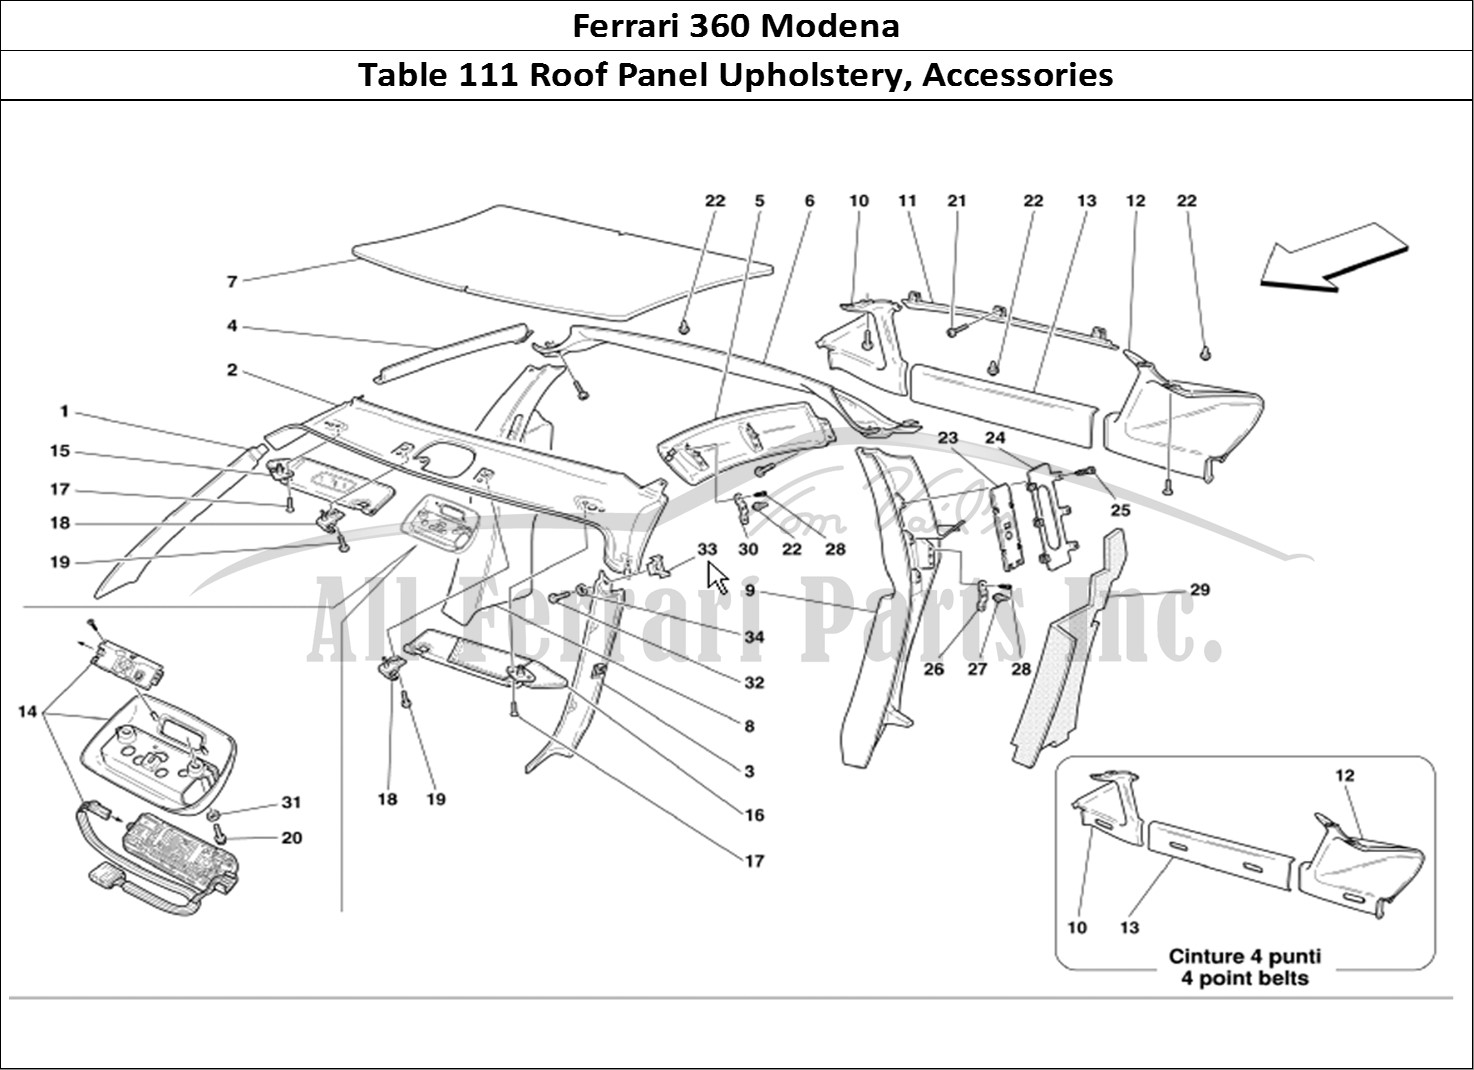 Ferrari Parts Ferrari 360 Modena Page 111 Roof Panel Upholstery and